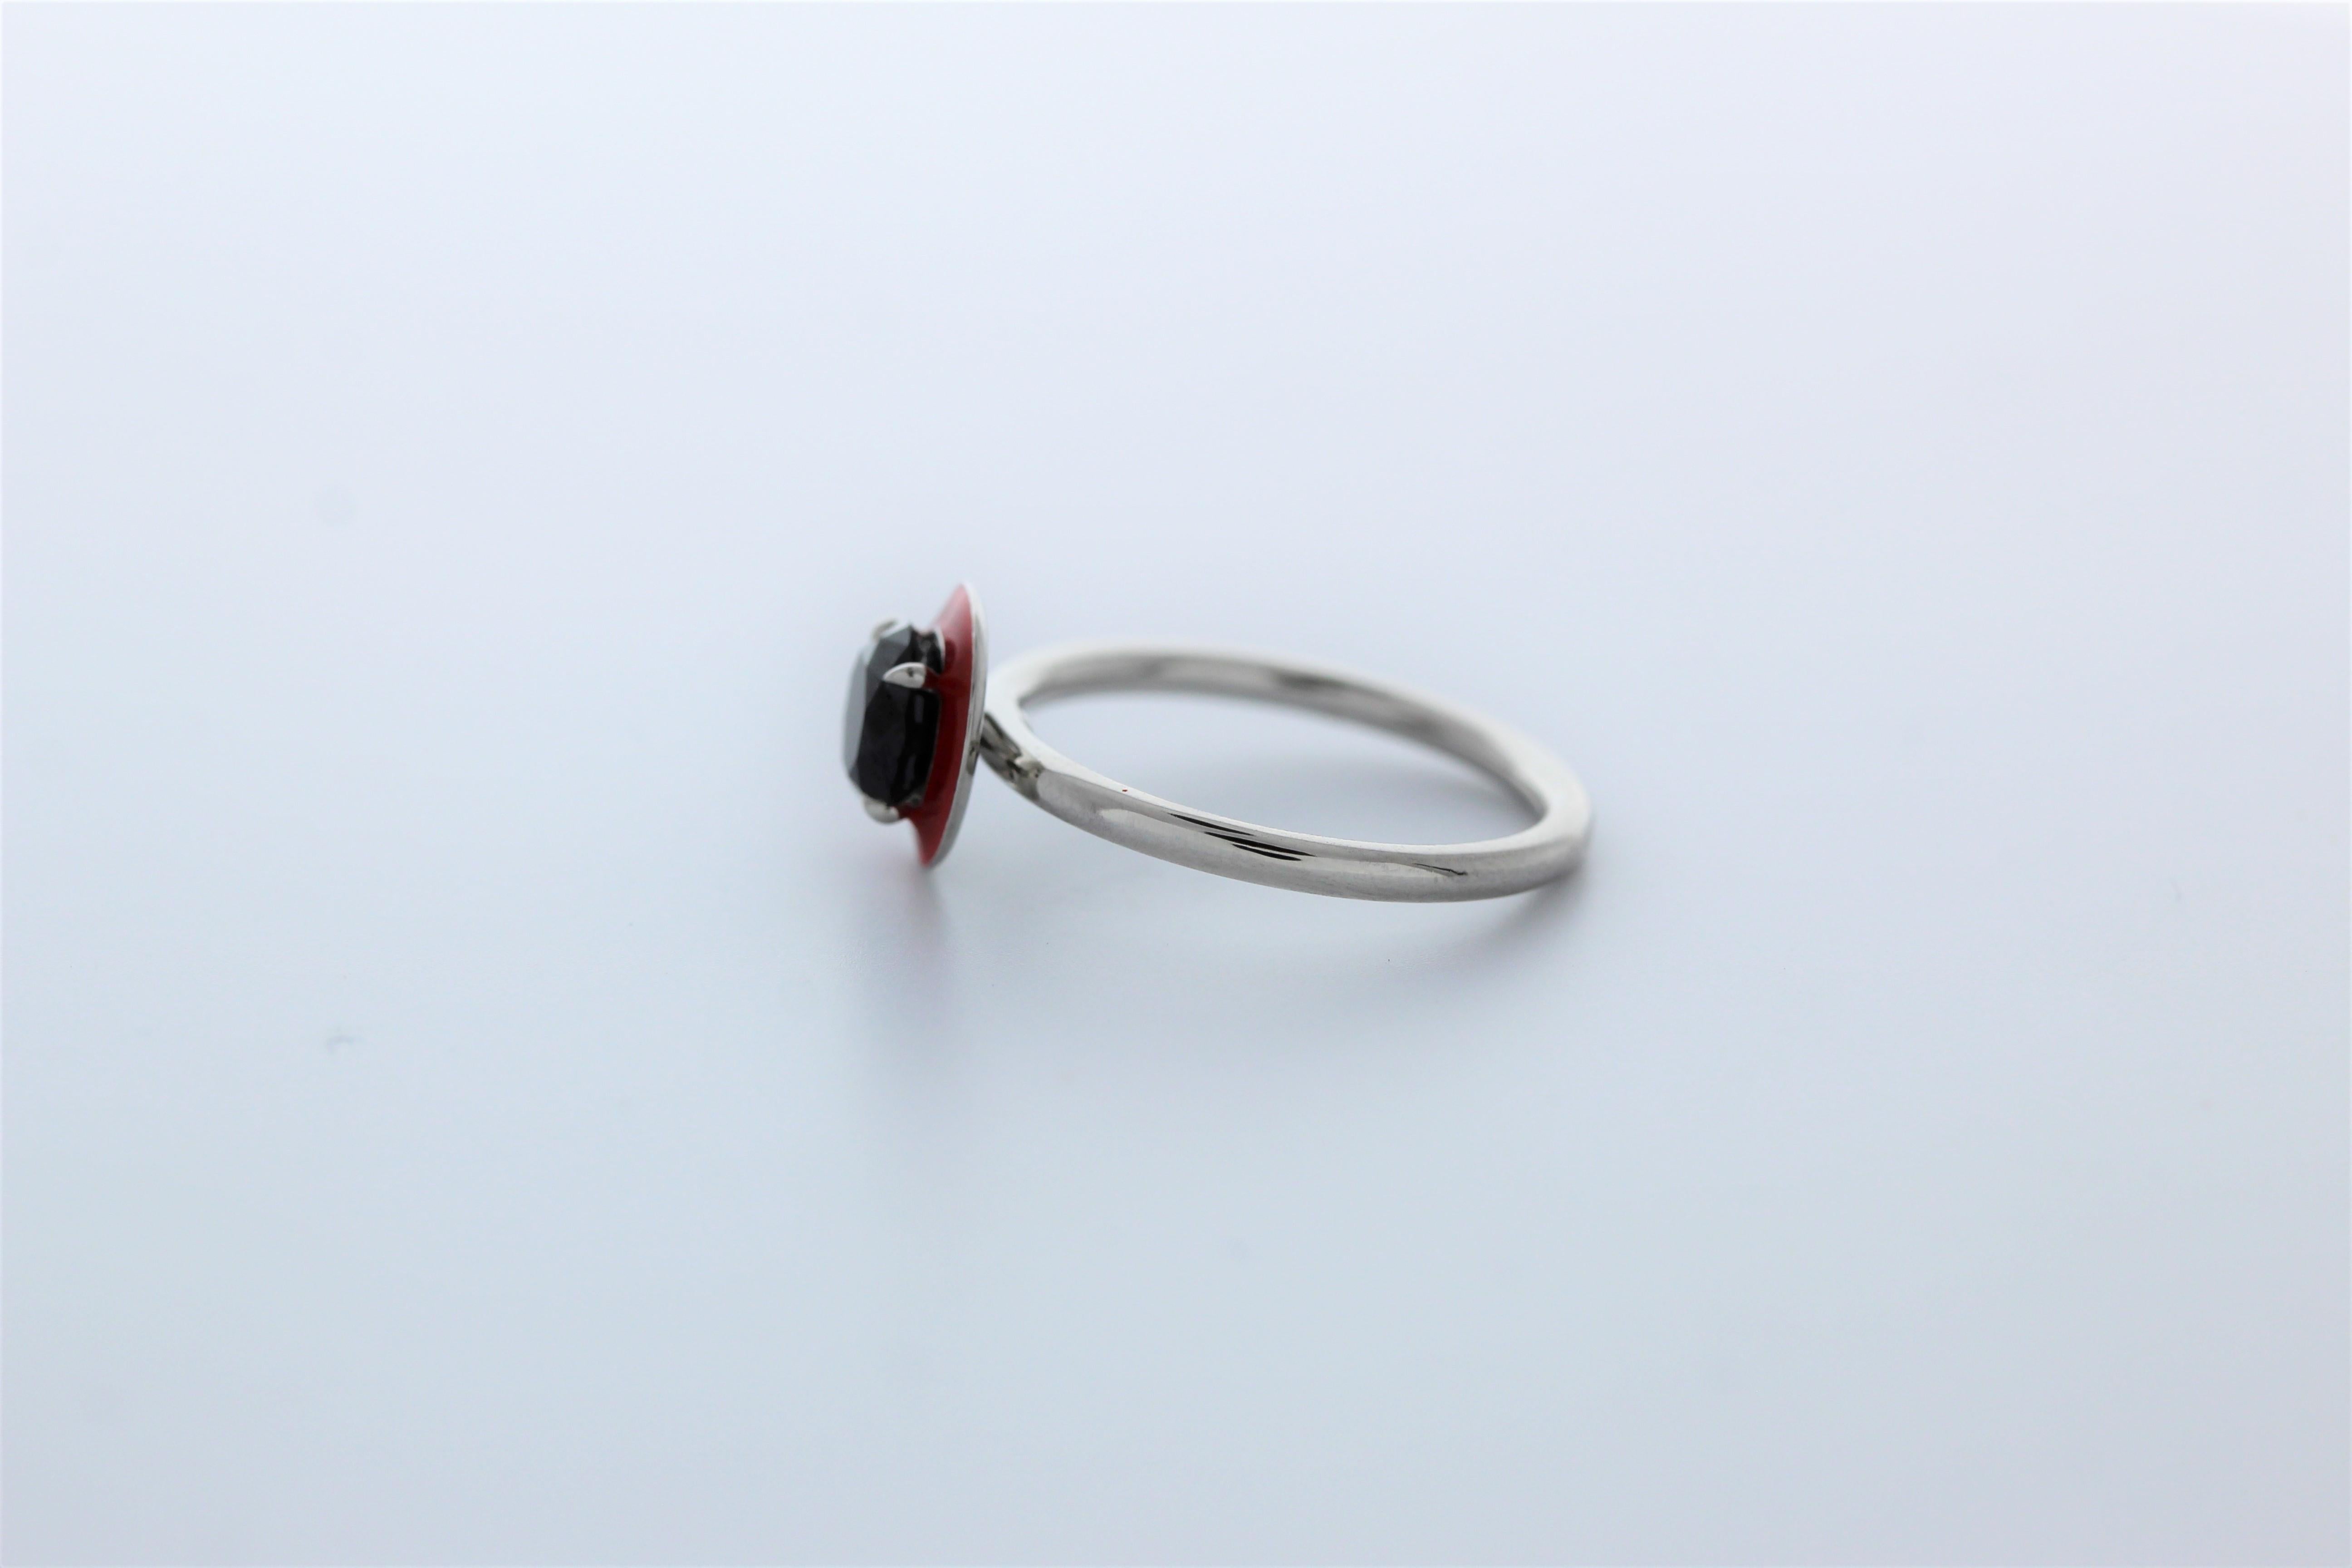 This modern natural black diamond and red enamel ring is perfectly designed.  The center 2 carat round brilliant diamond is prong set in a platinum measuring 7.25 x 7.24 x 5.32 mm.  The center diamond is accented with rich red enamel creating a halo